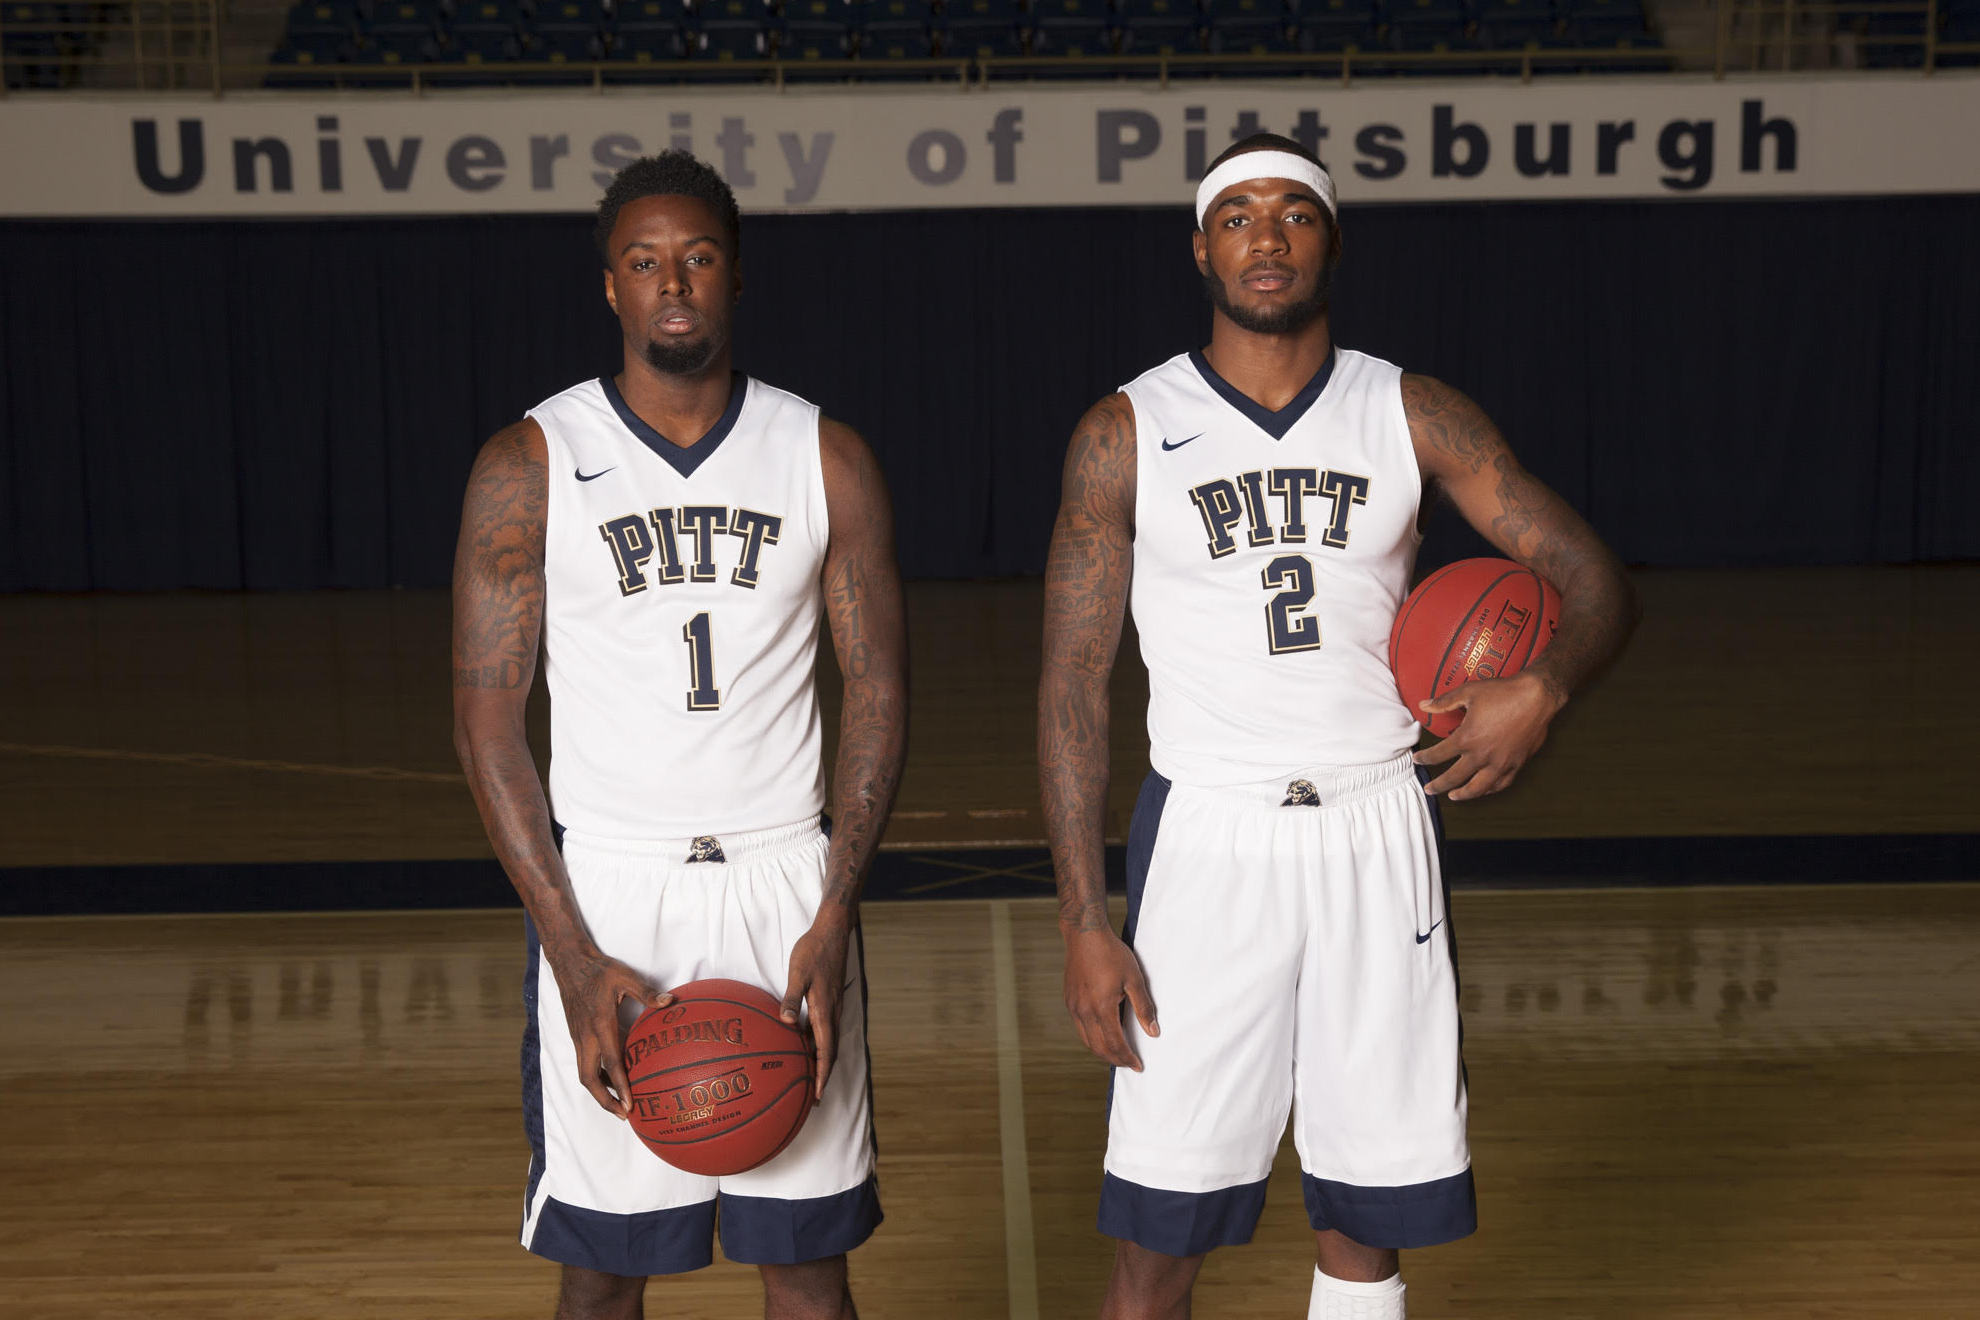 How Pitt Star Michael Young Escaped His Nightmarish Past